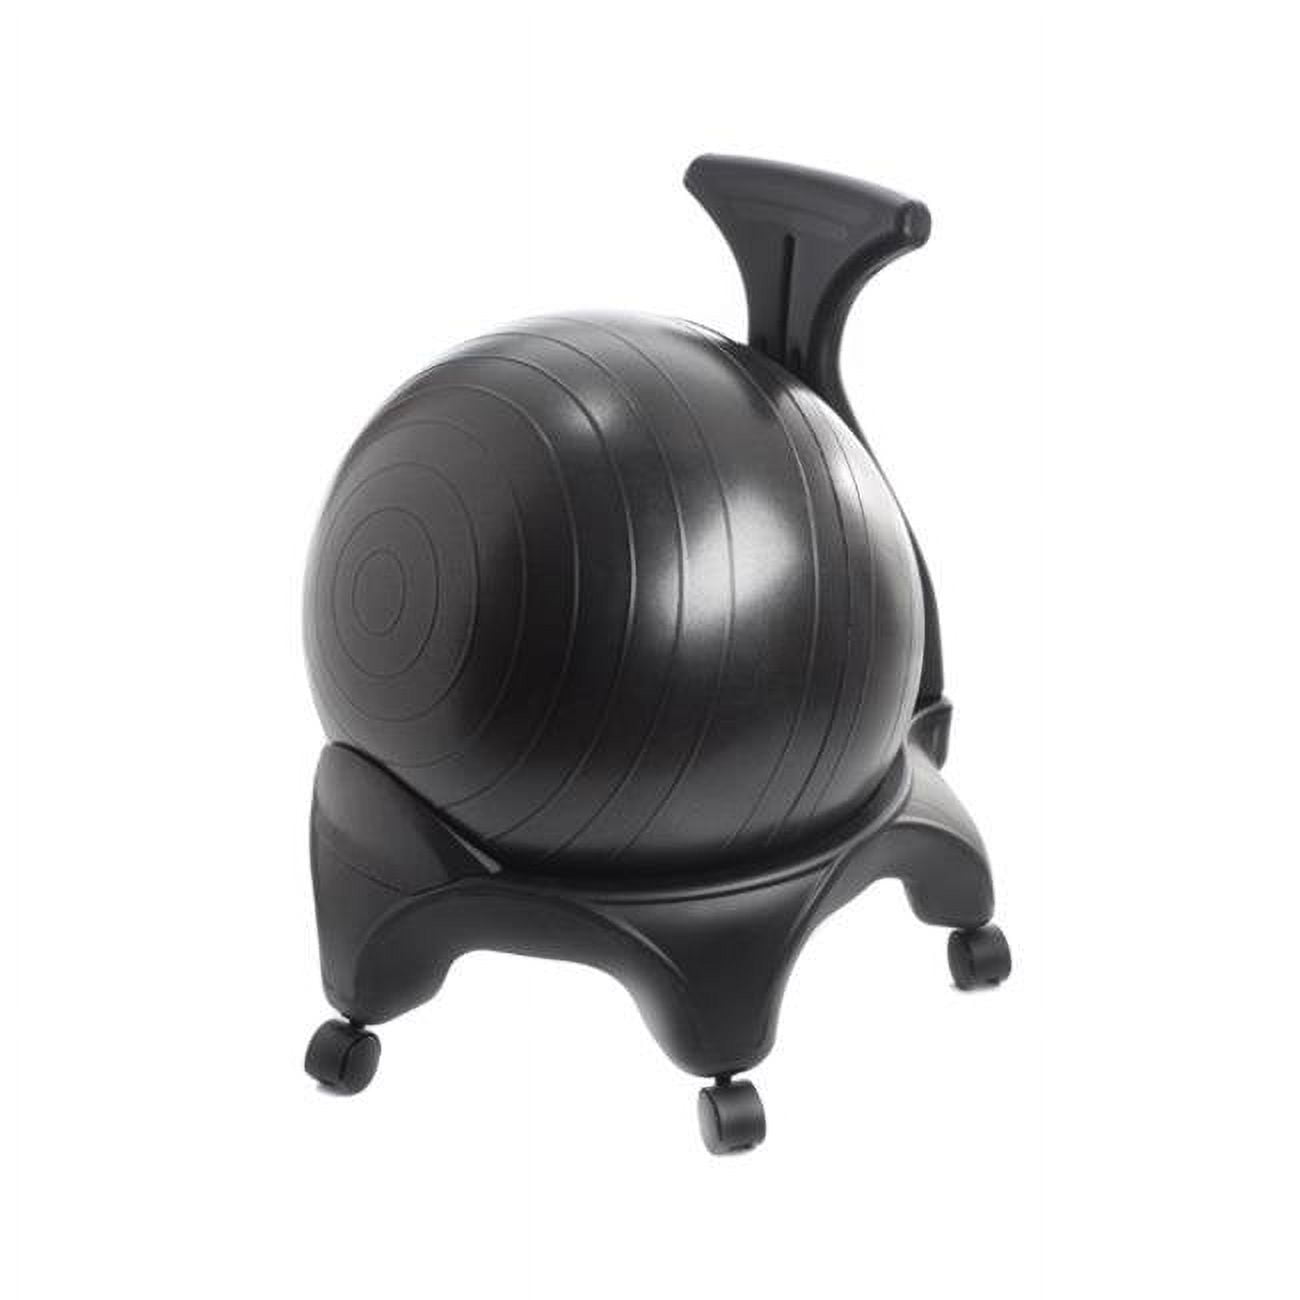 Picture of AeroMat 75050 Stability Ball Chair